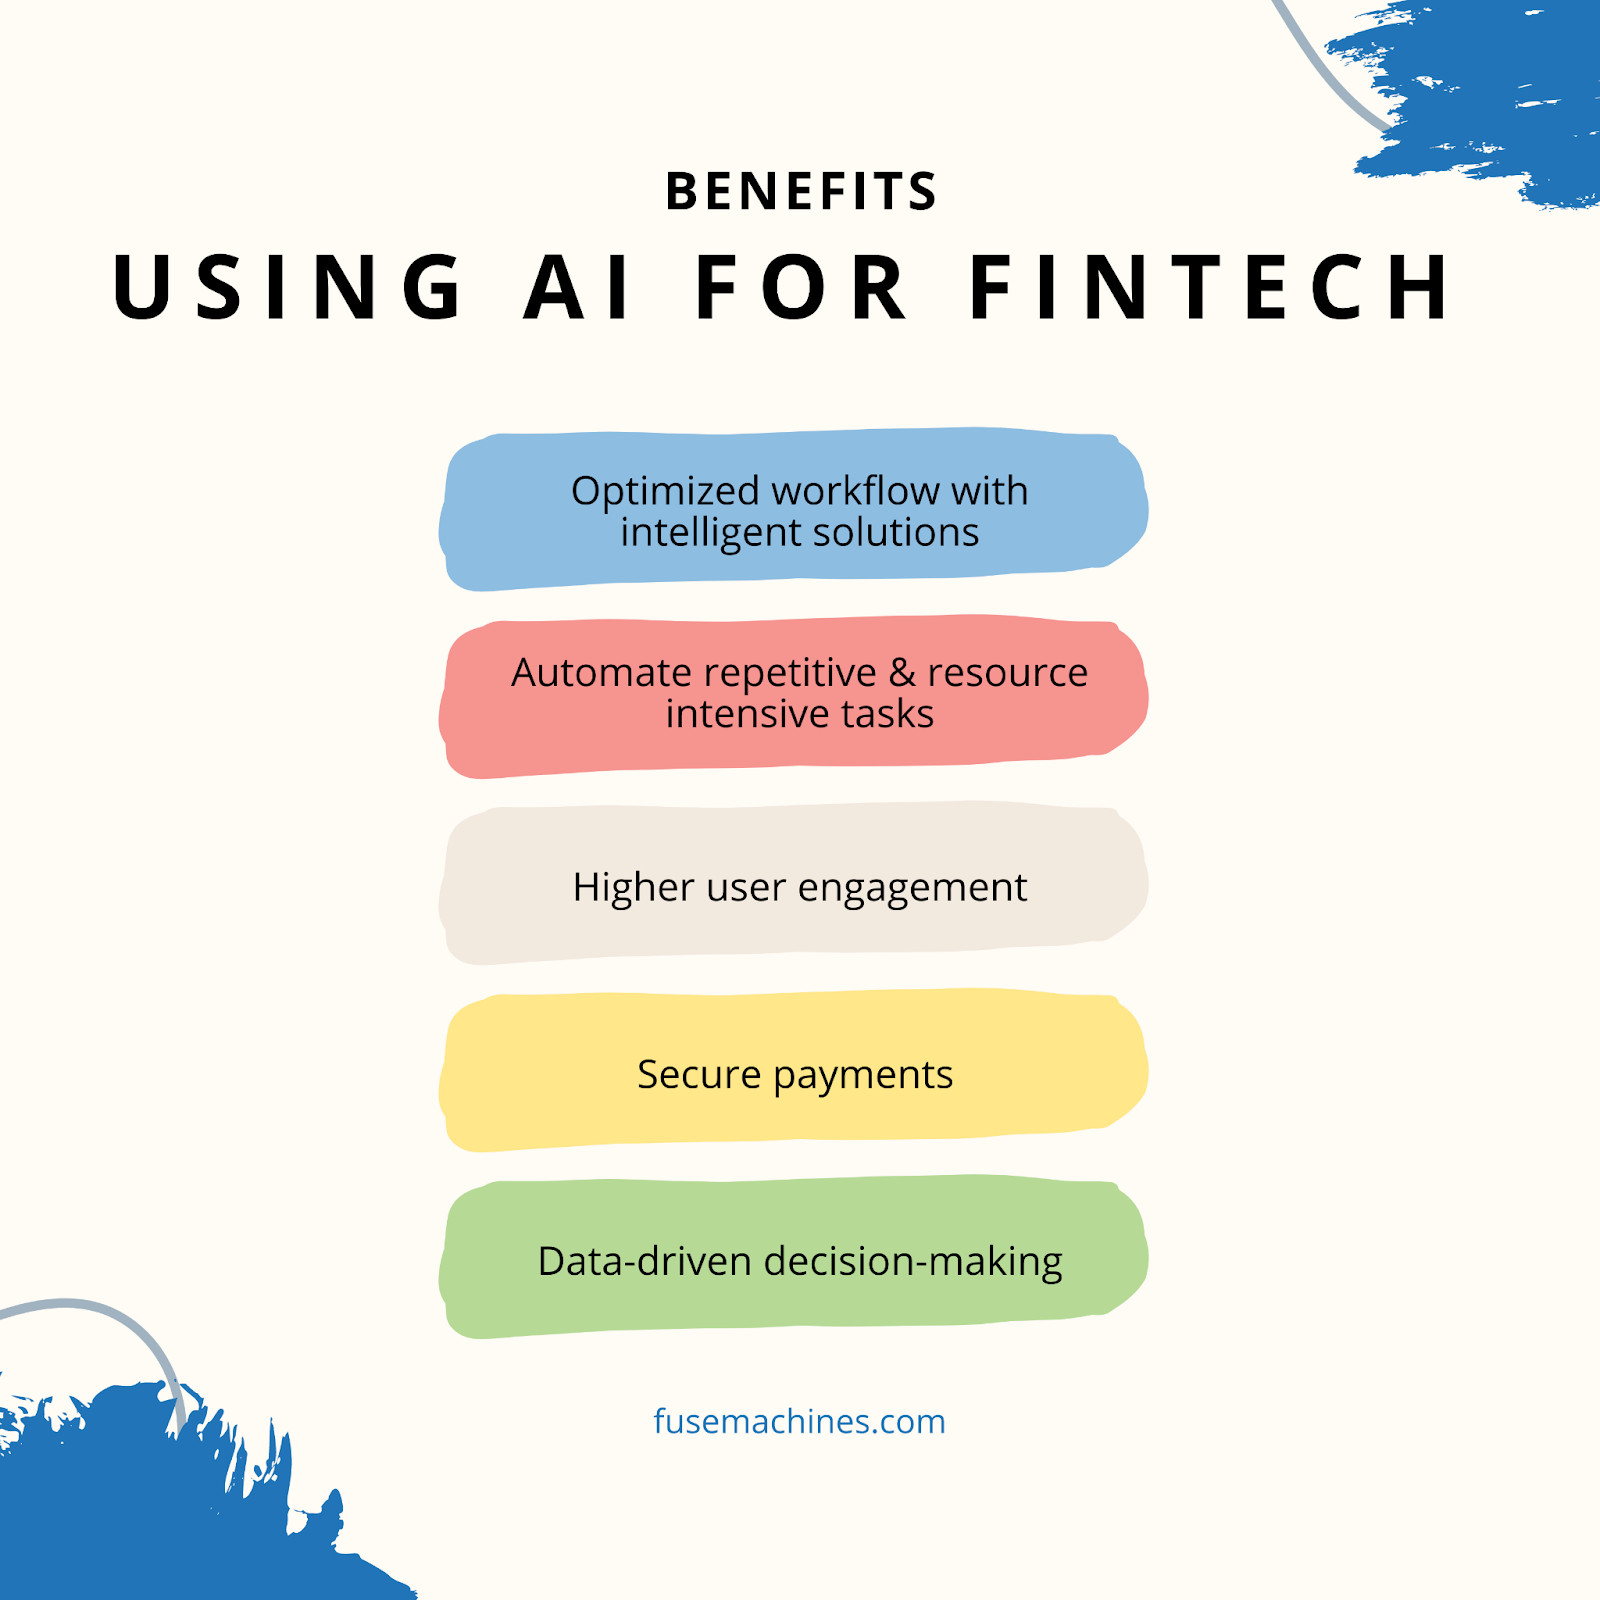 Benefits of AI in fintech